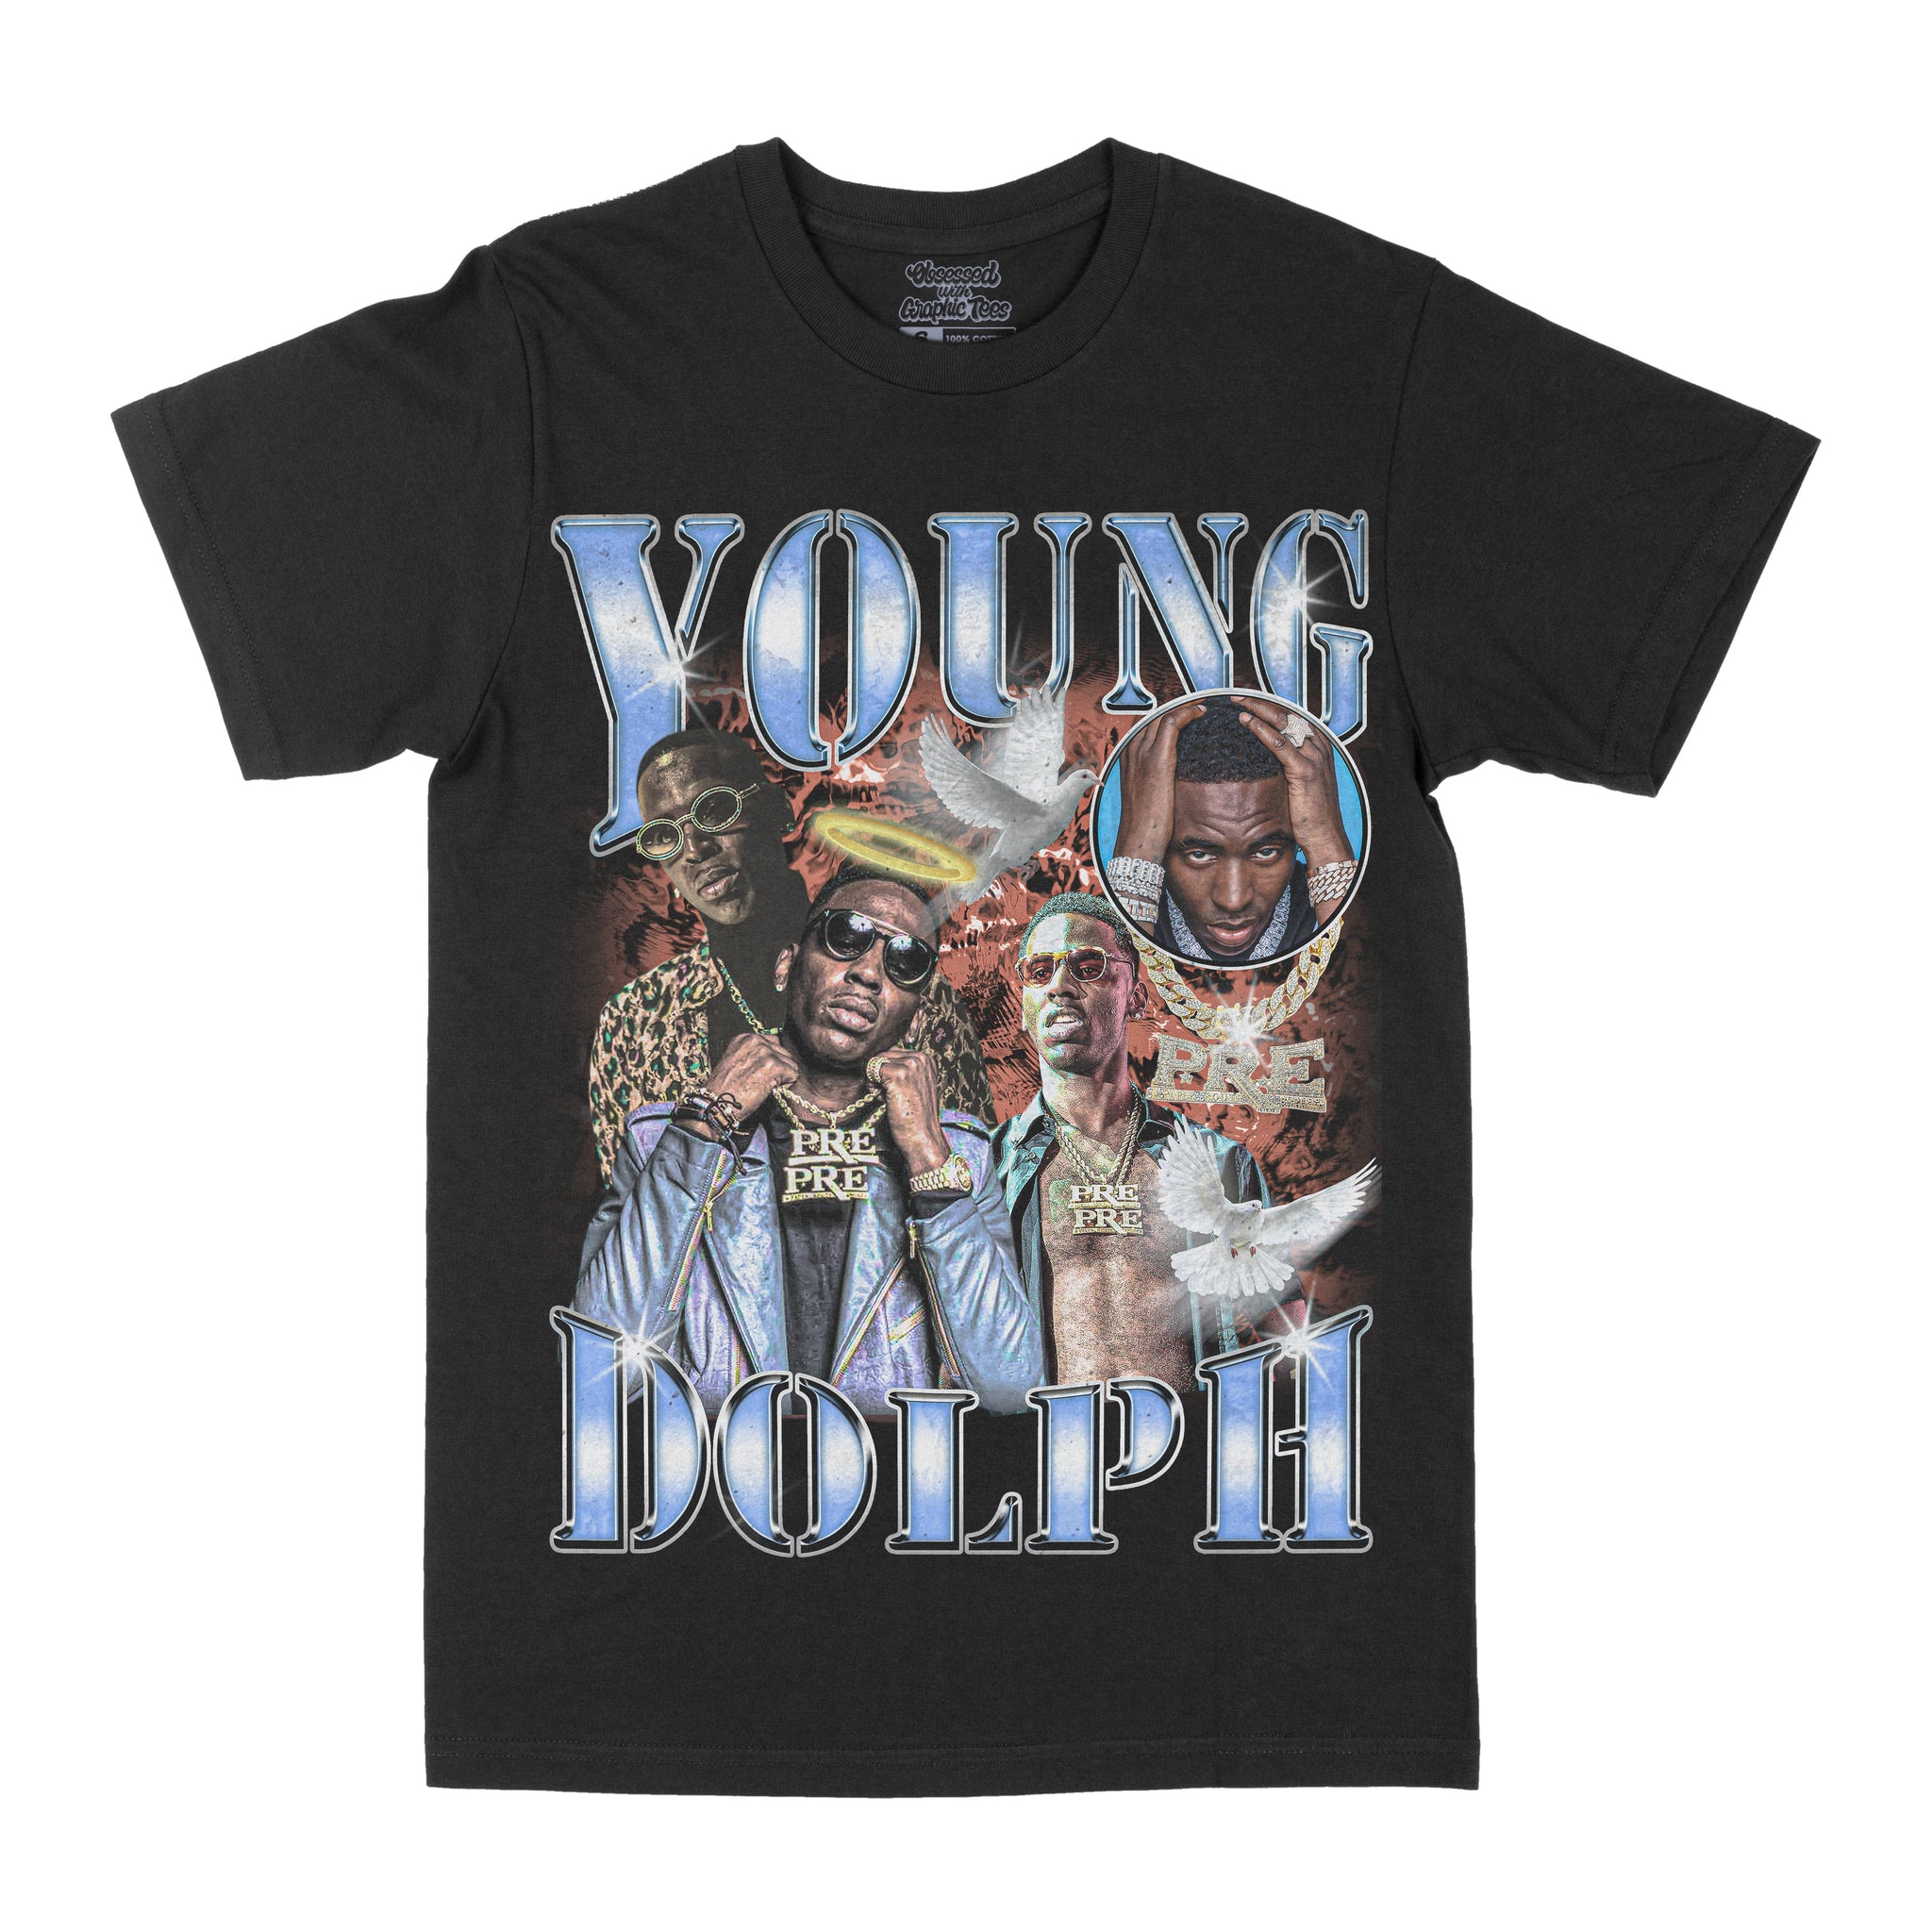 Young Dolph "PRE" Graphic Tee